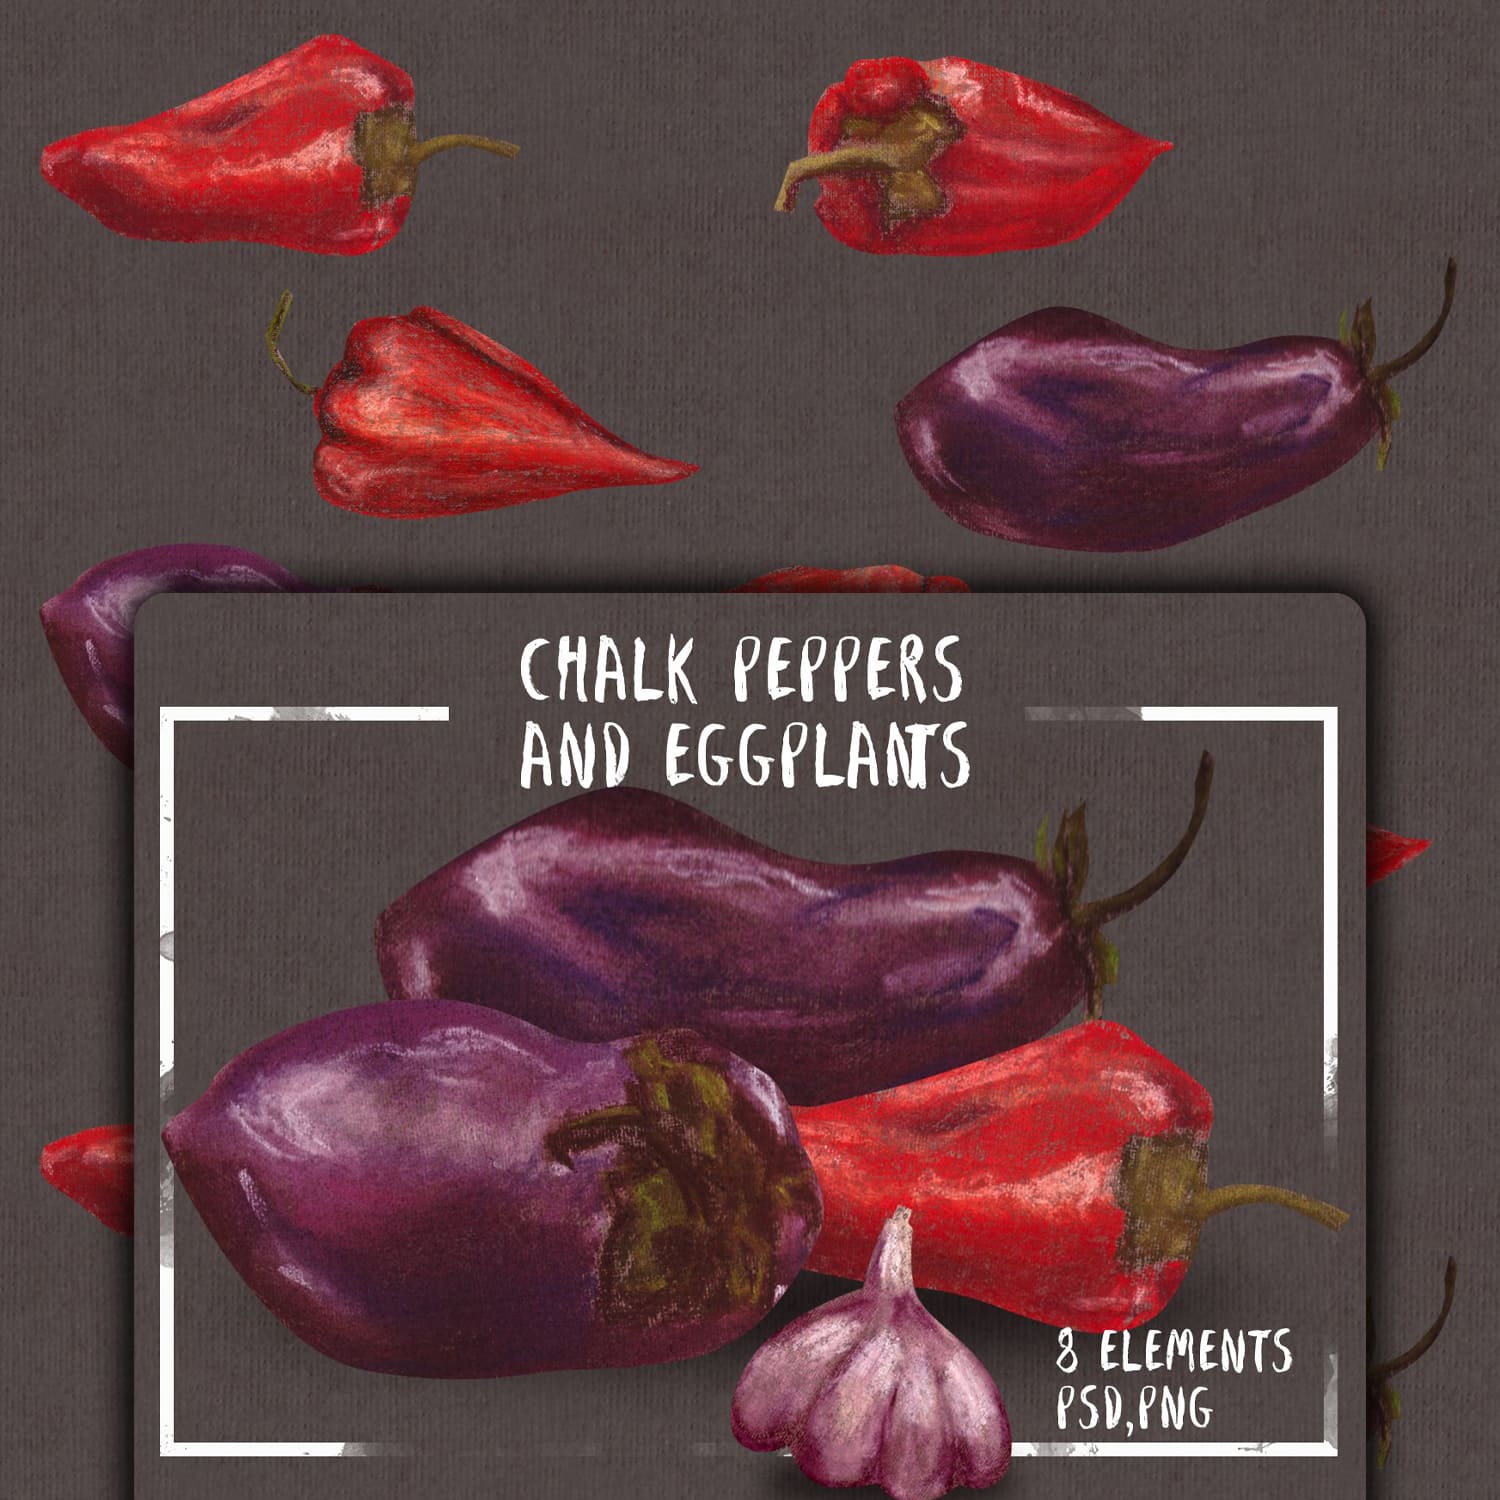 Chalk peppers ang eggplants set cover.